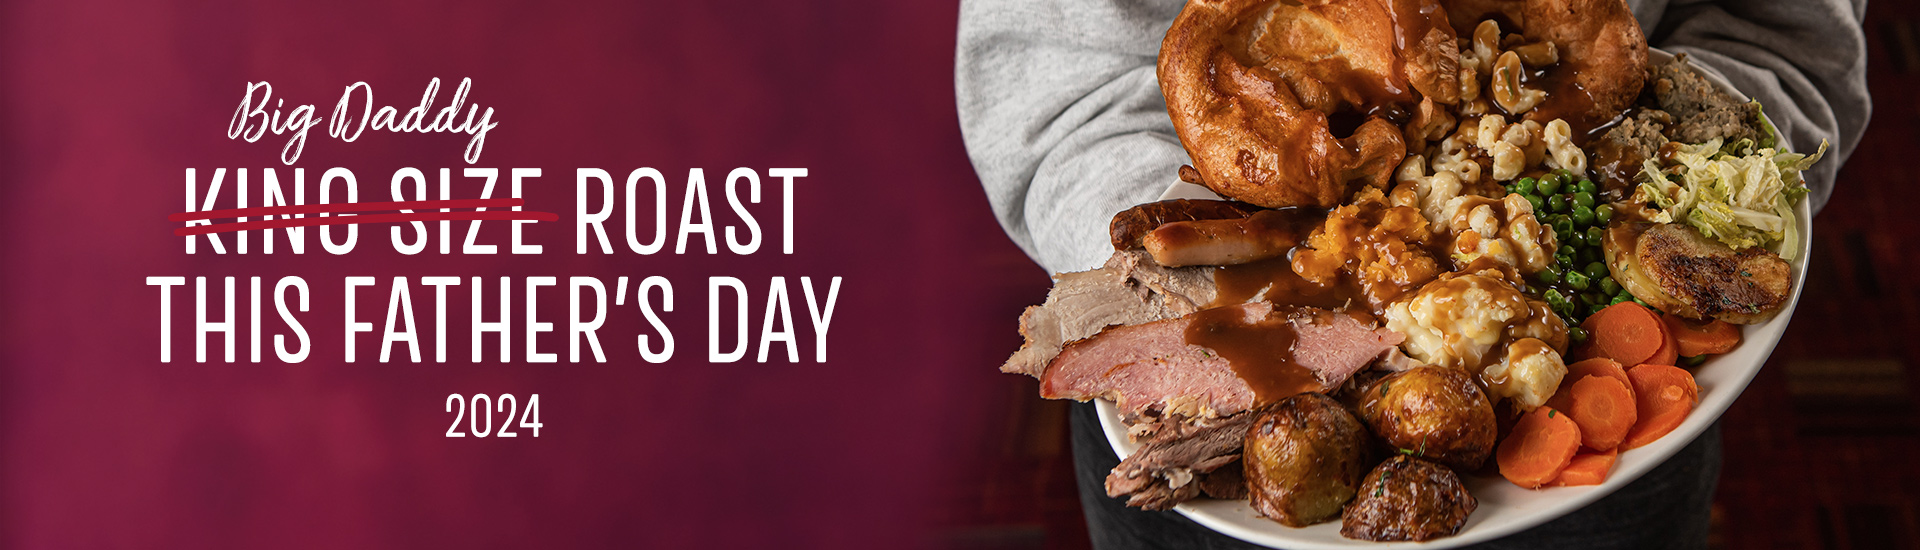 Father’s day carvery in Birmingham, Father’s day at Toby Carvery Quinton